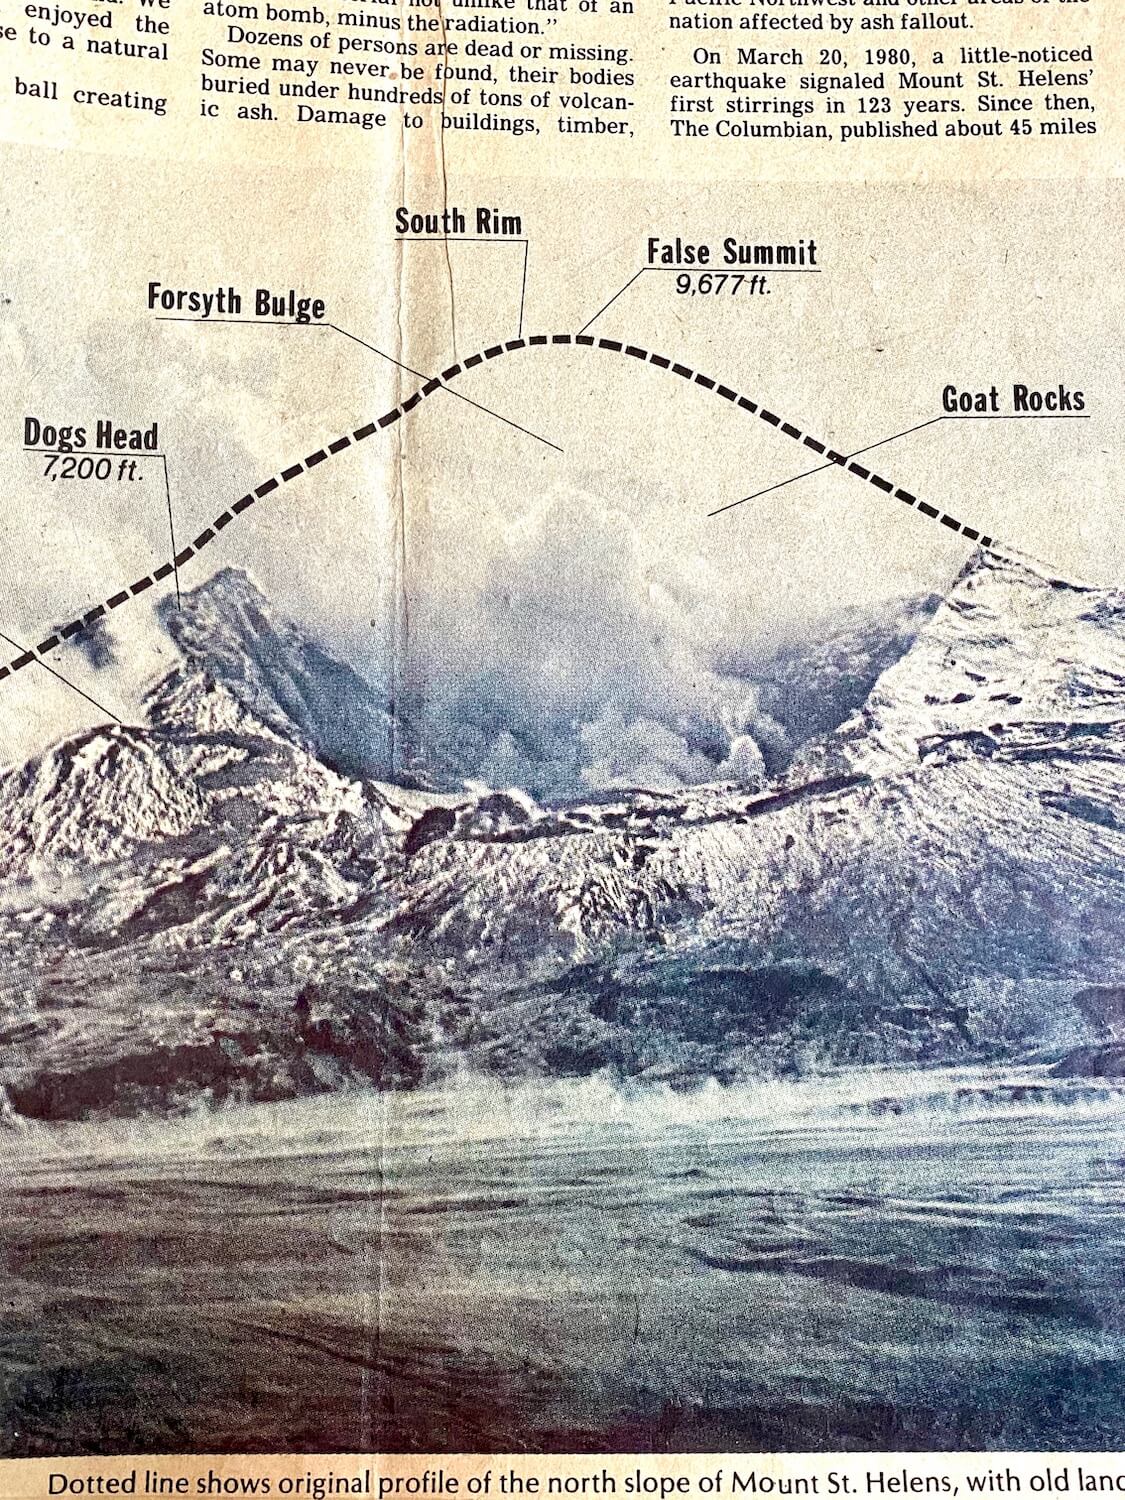 A newspaper clipping from around the time of the May 18, 1980 eruption of Mt. St. Helens shows the devastating damage the blast created by blowing off almost half of the mountain. The photo shows the cratered mountain in black and white with a dotted line to reflect the former top of the mountain.